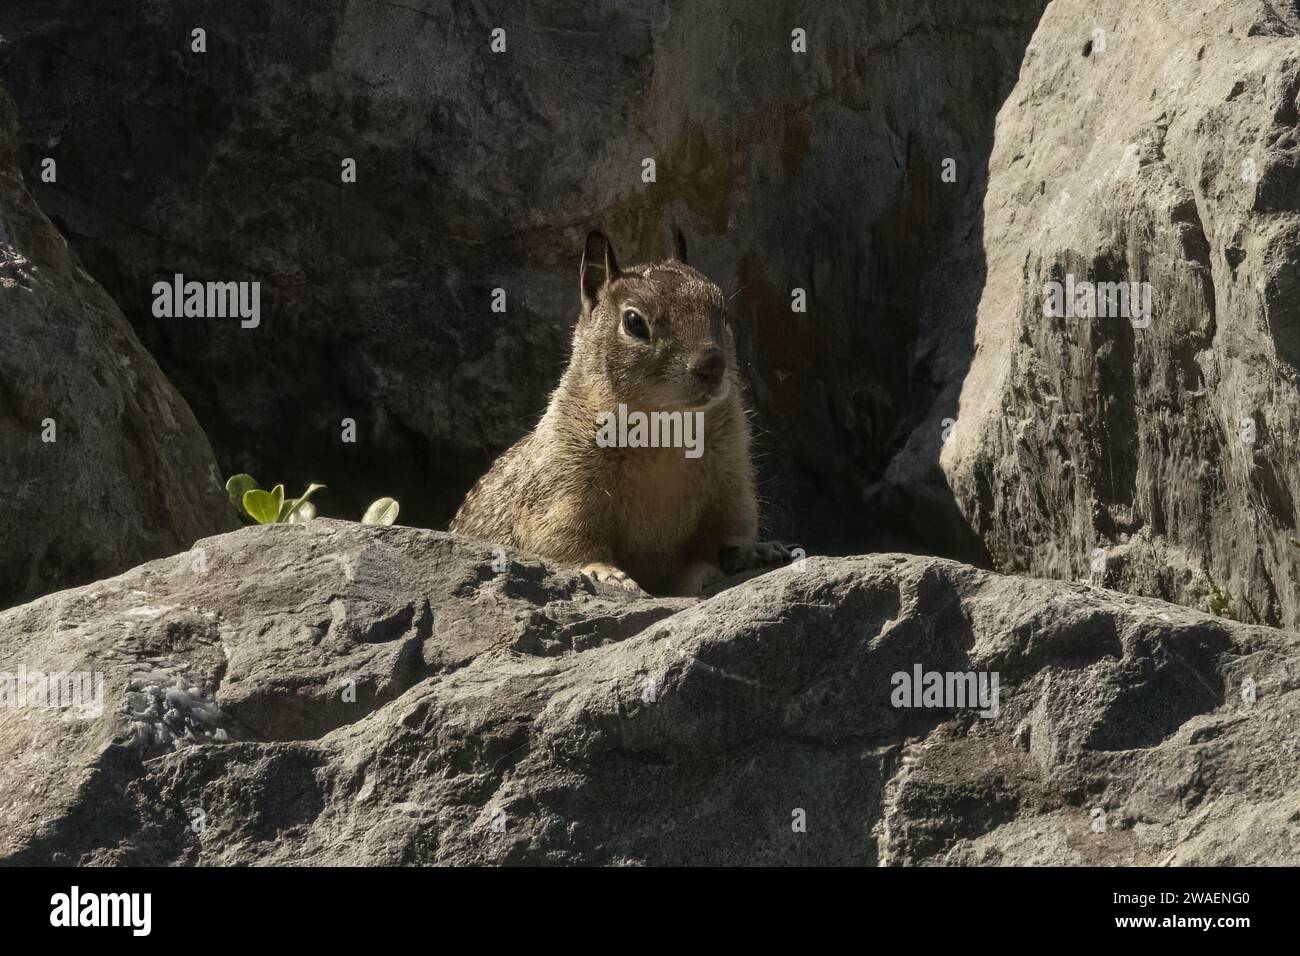 An inquisitive ground squirrel peeking out from between large rocks in Emeryville, California, USA Stock Photo